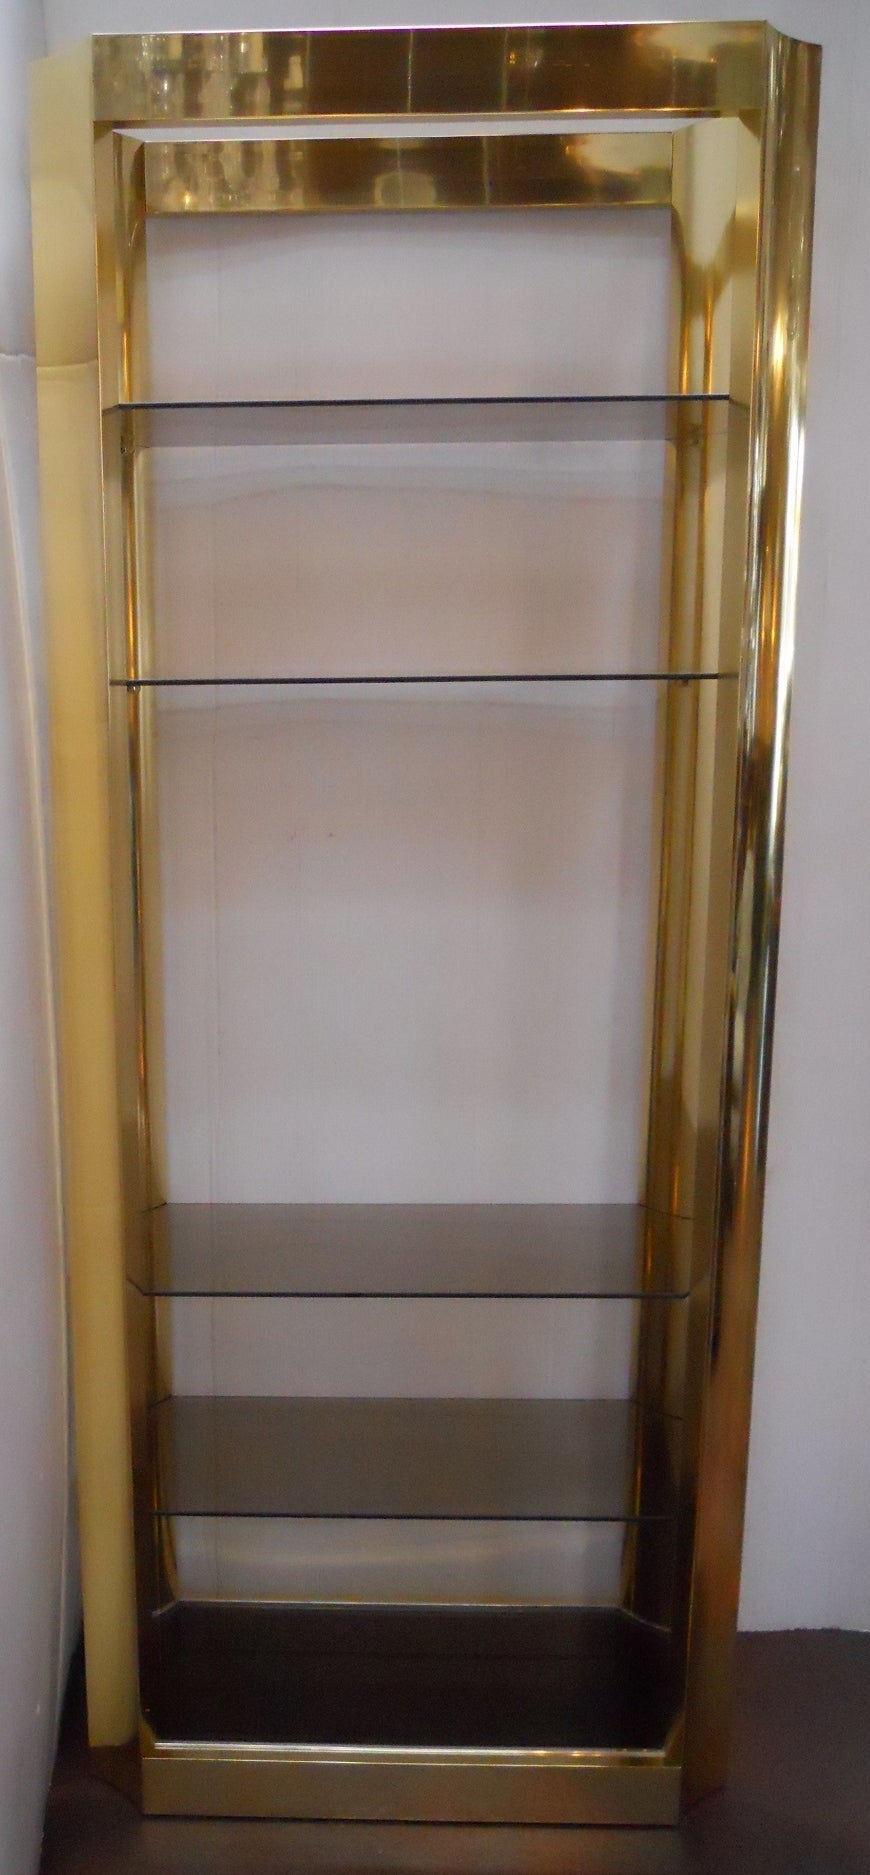 Pair of American vintage etageres.
Aluminum gold-plated.
Five glass pieces per each etagere. All have been recently replaced.